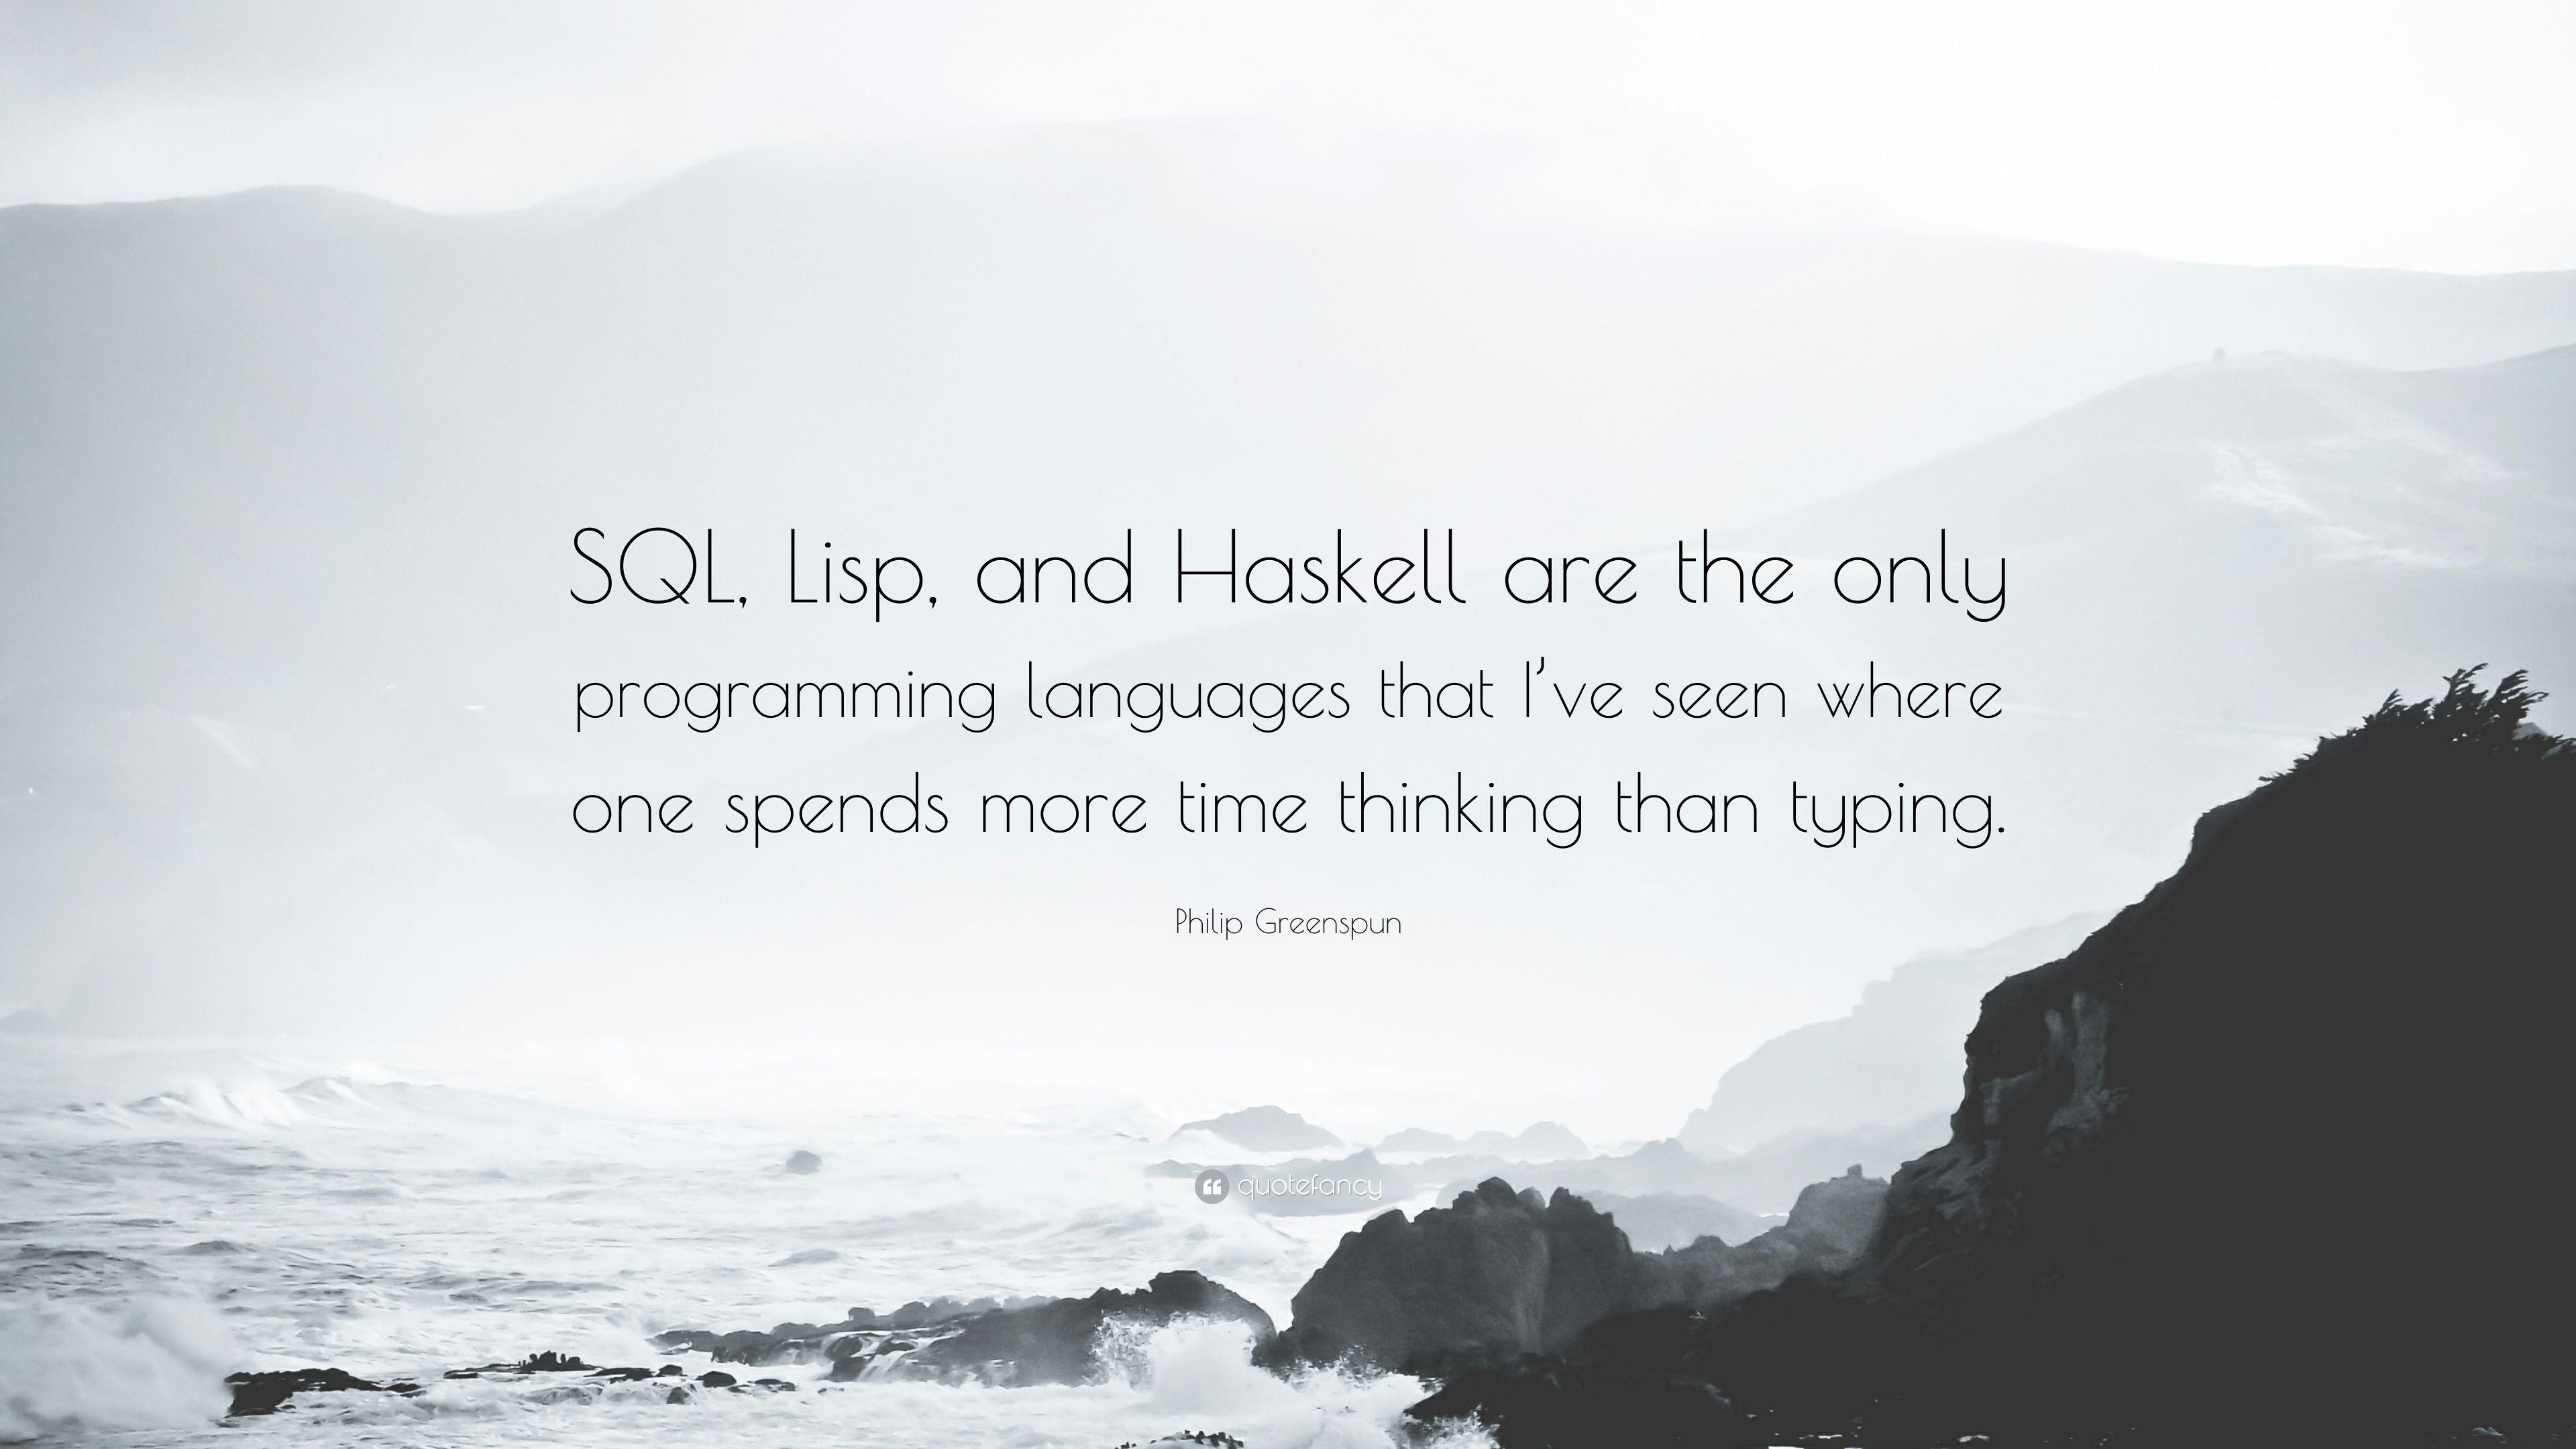 Philip Greenspun Quote: “SQL, Lisp, and Haskell are the only